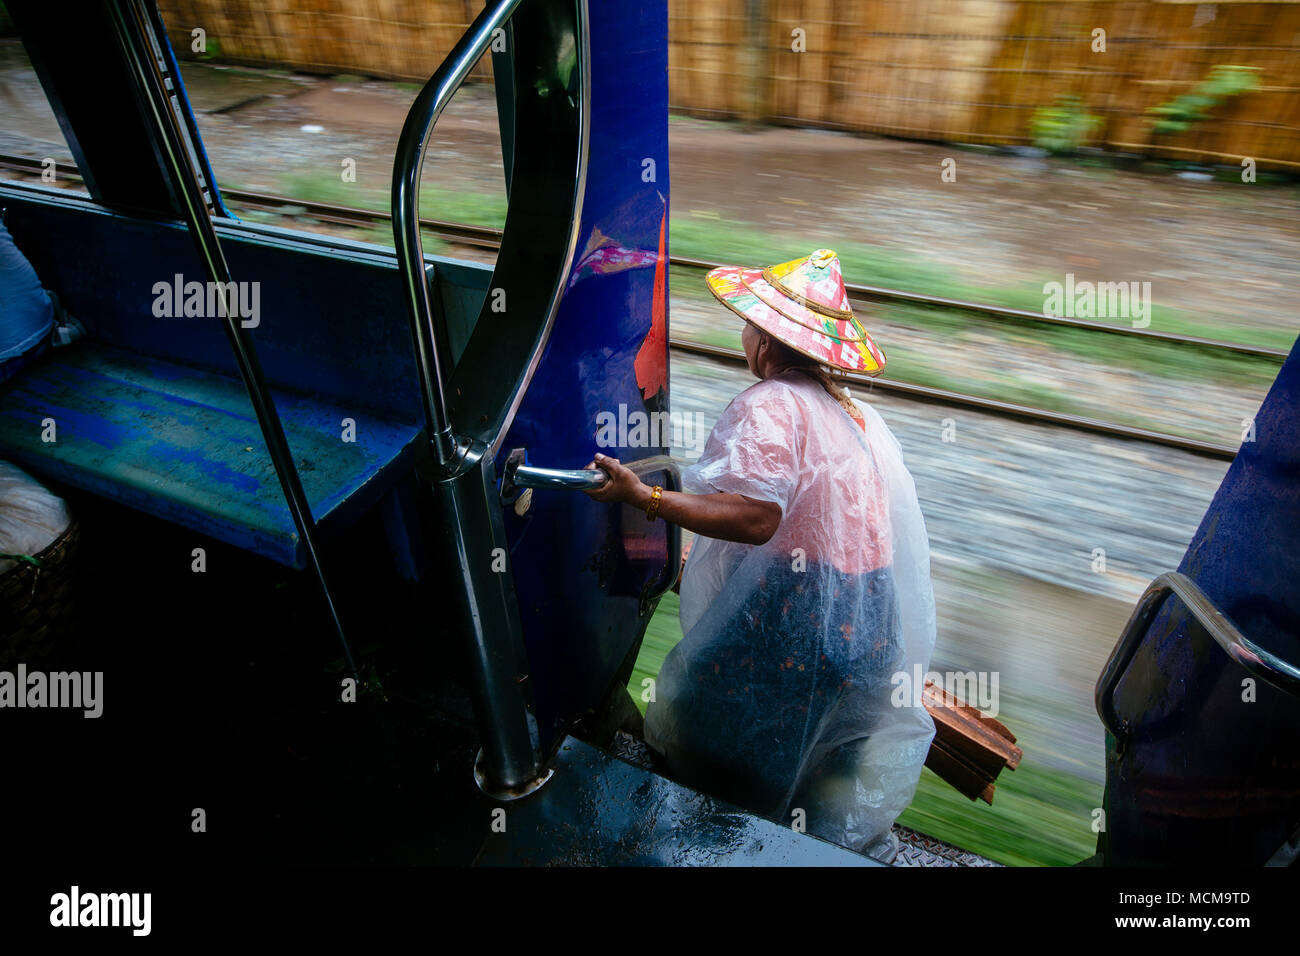 Woman wearing traditional hat and plastic raincoat leaning out of moving train, Yangon, Myanmar Stock Photo